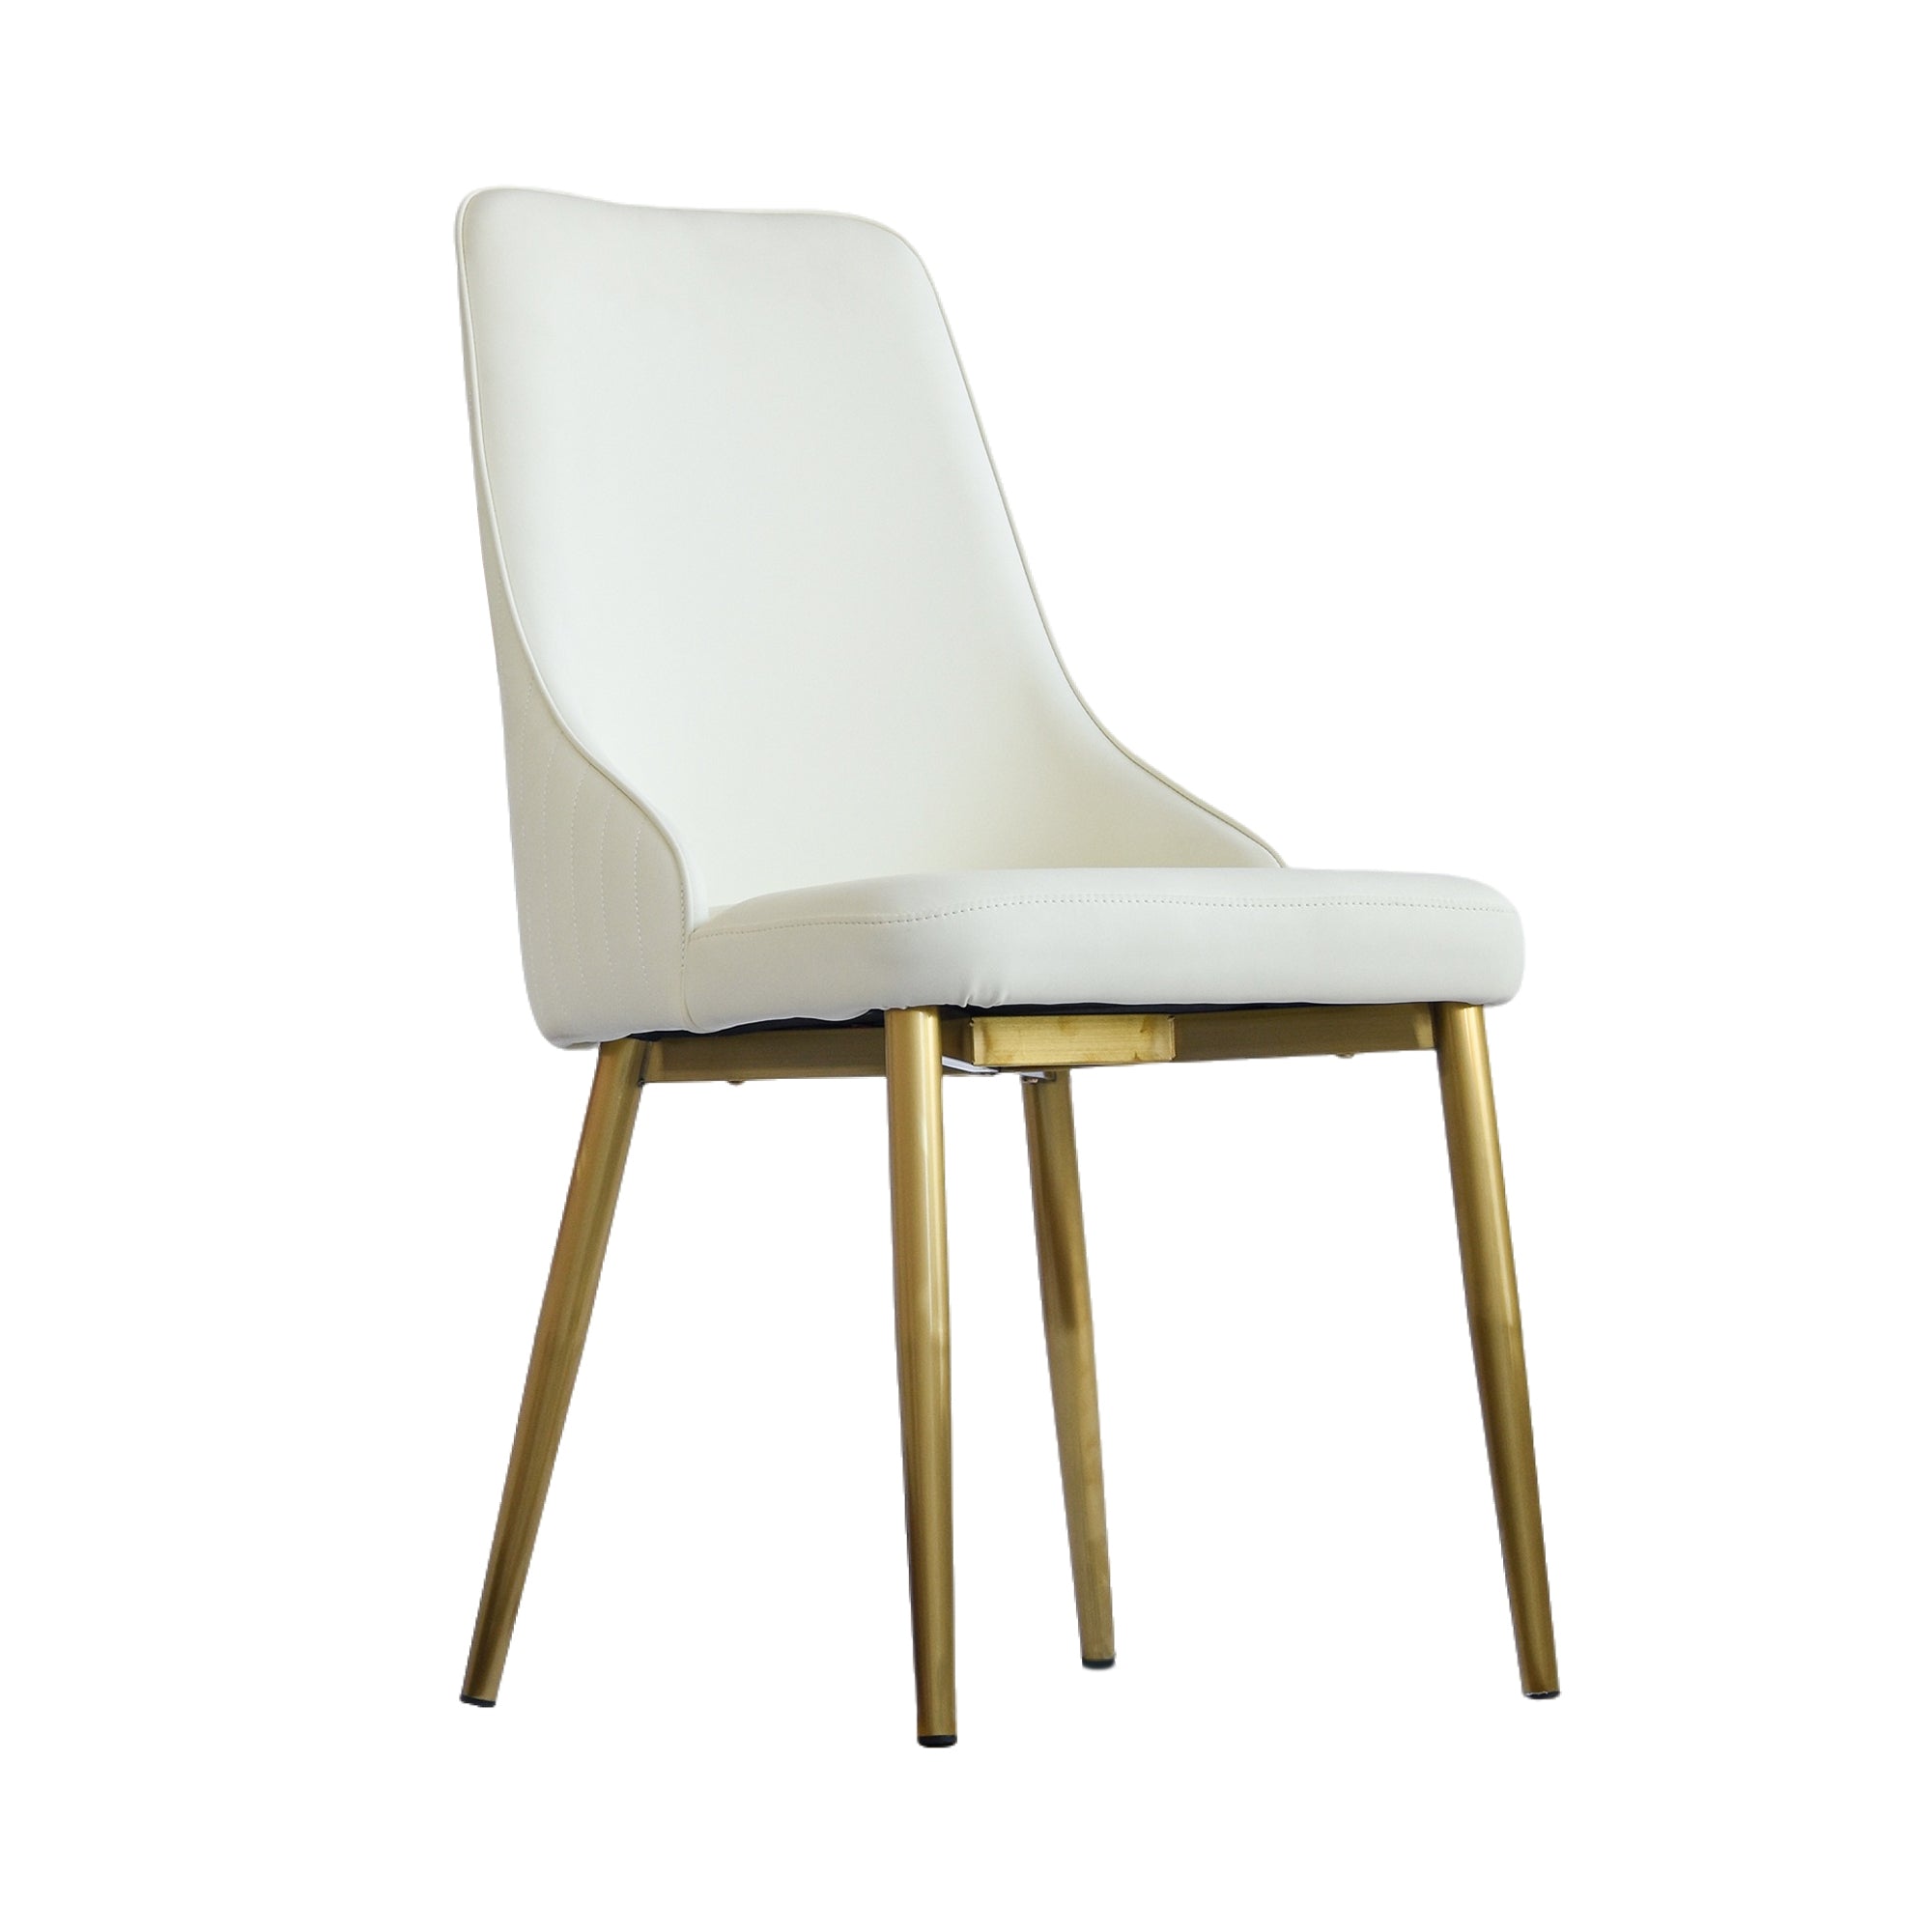 Modern Dining Chairs With Solid Wood Metal Legs (Set of 2) - White